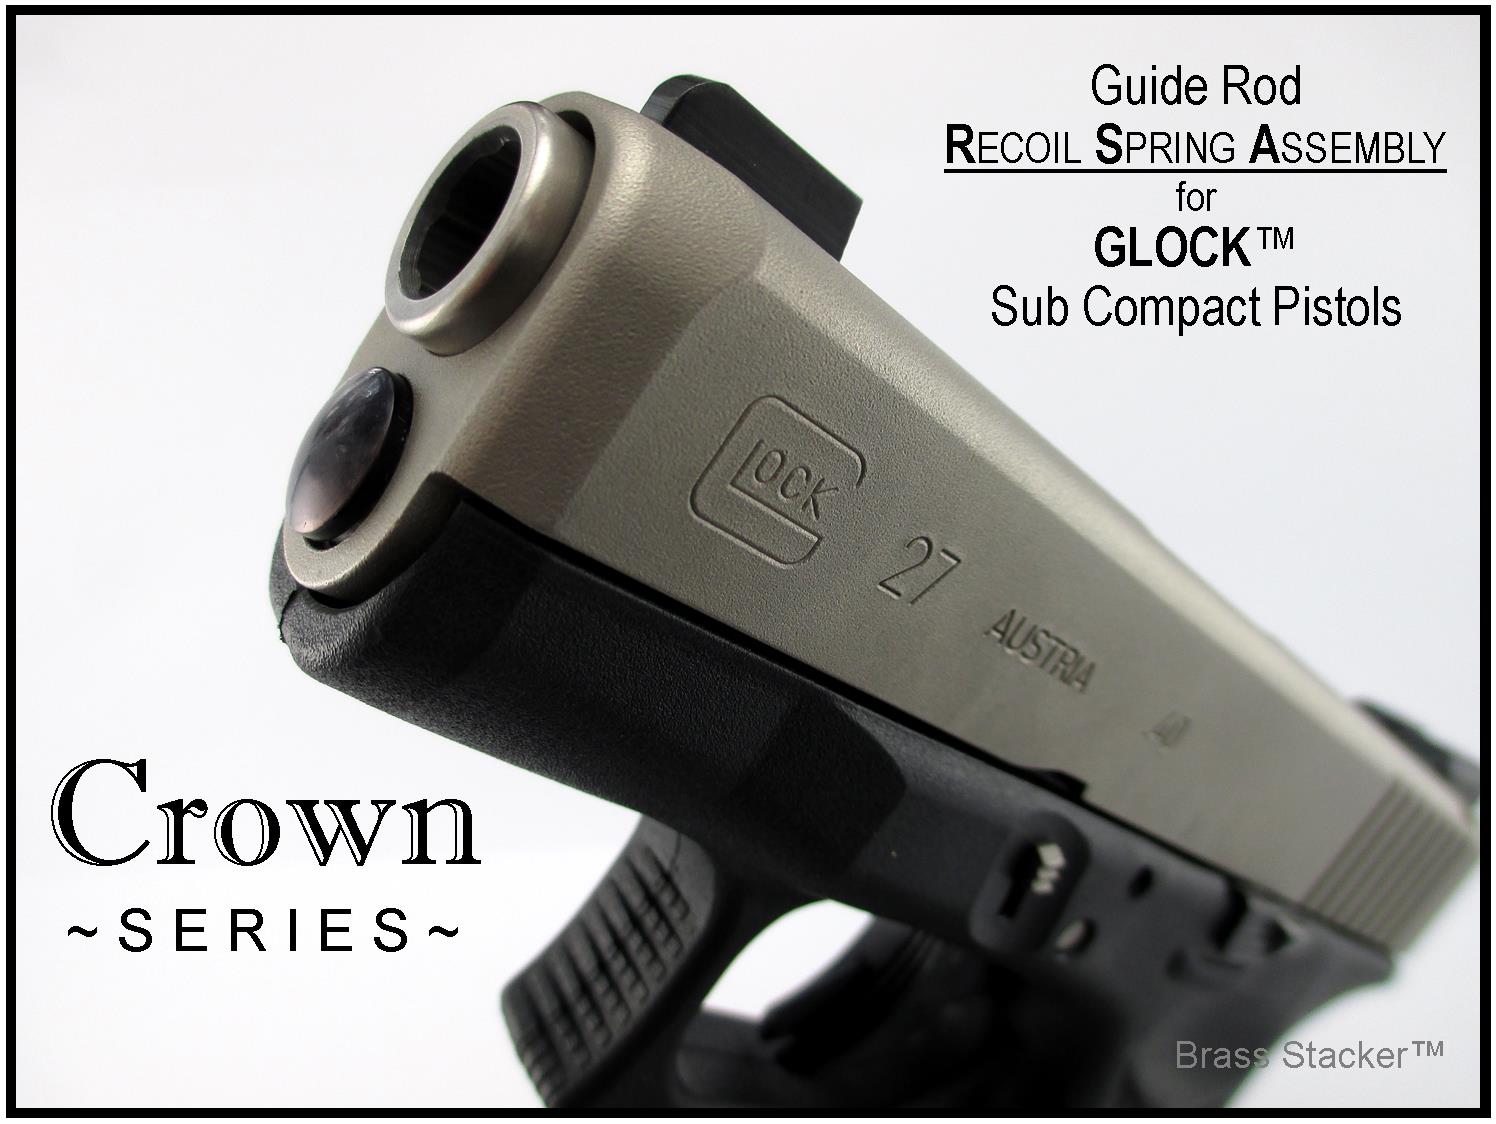 Brass Stacker™ RSA for Glock™ Sub Compact Frame Pistols